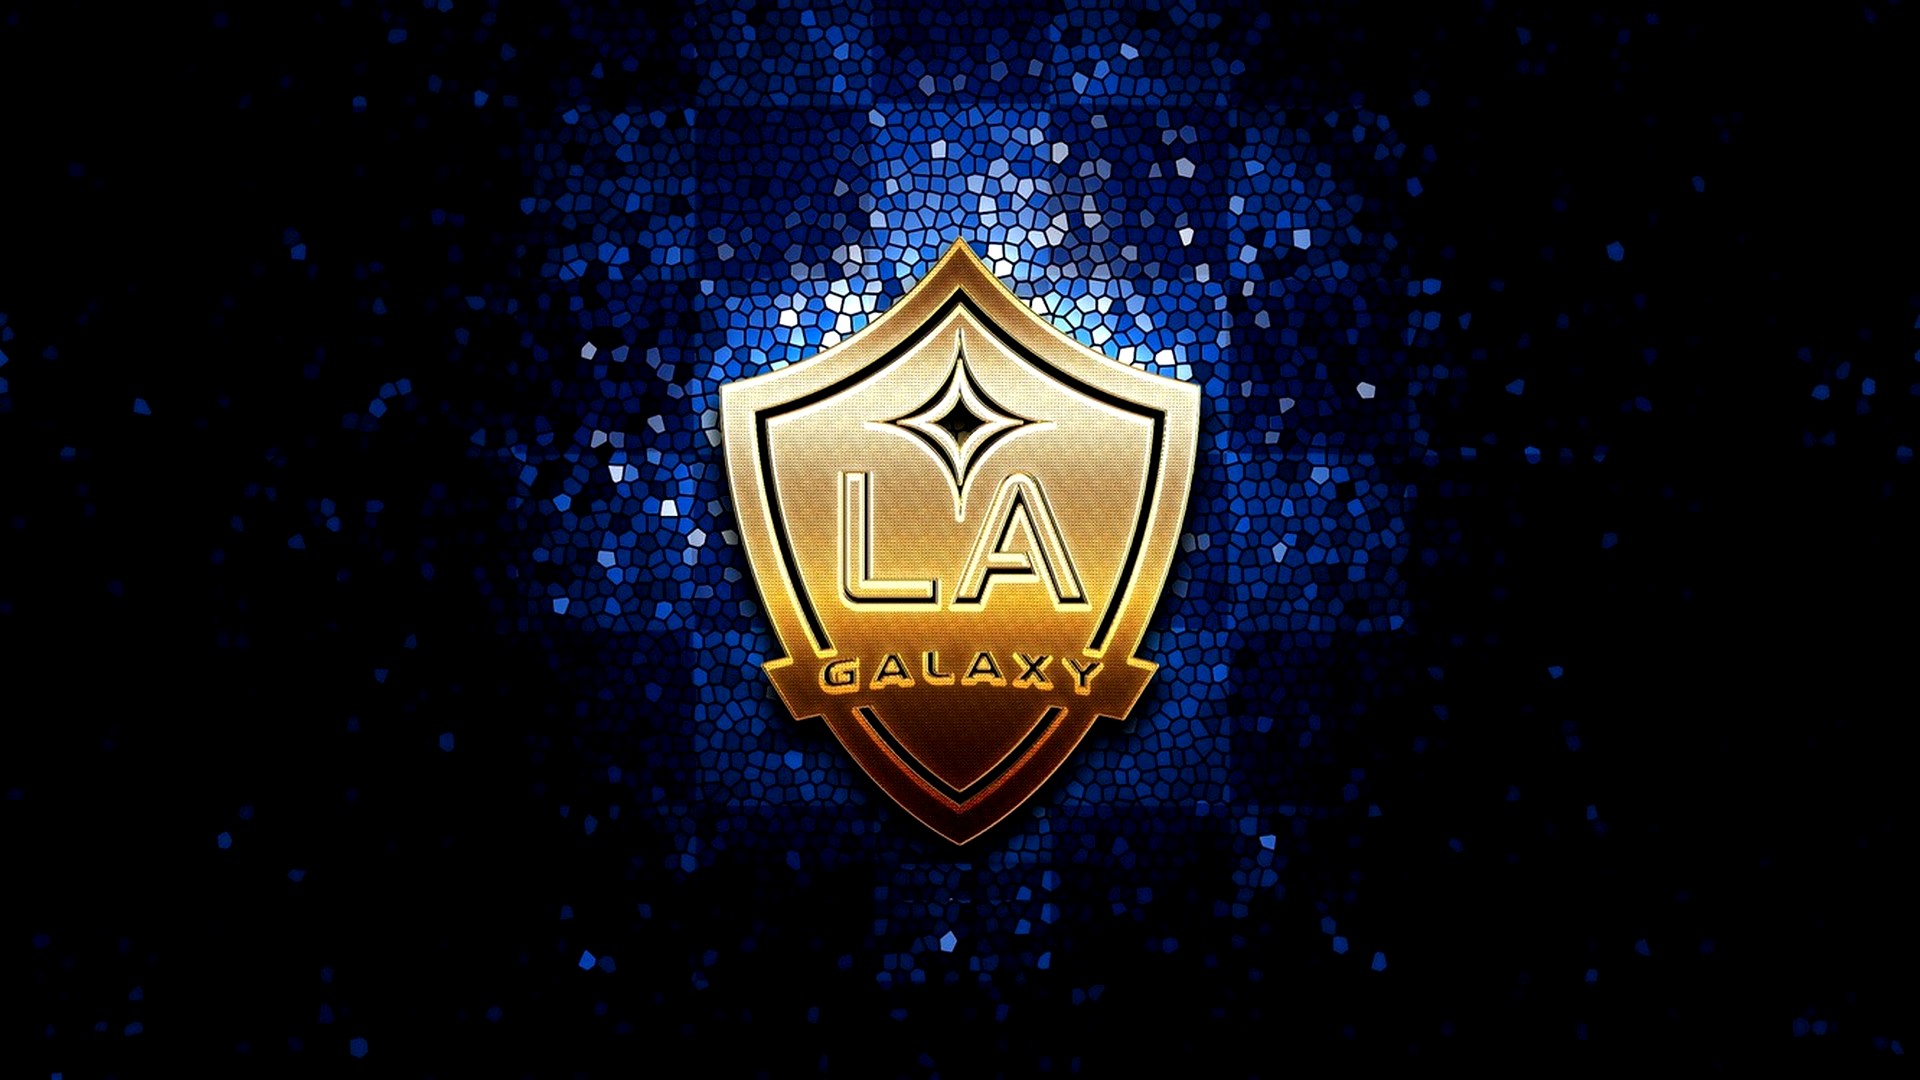 Los Angeles Galaxy For Desktop Wallpaper with high-resolution 1920x1080 pixel. You can use this wallpaper for your Desktop Computers, Mac Screensavers, Windows Backgrounds, iPhone Wallpapers, Tablet or Android Lock screen and another Mobile device